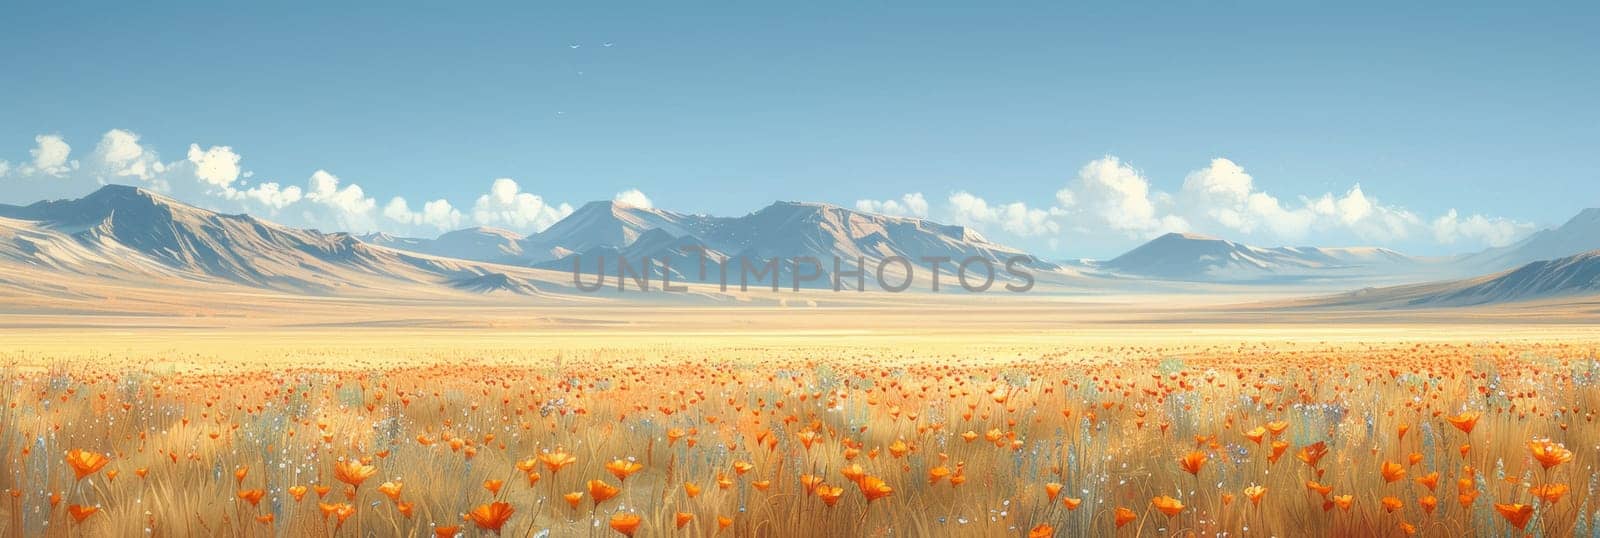 A large field of yellow flowers with mountains in the background